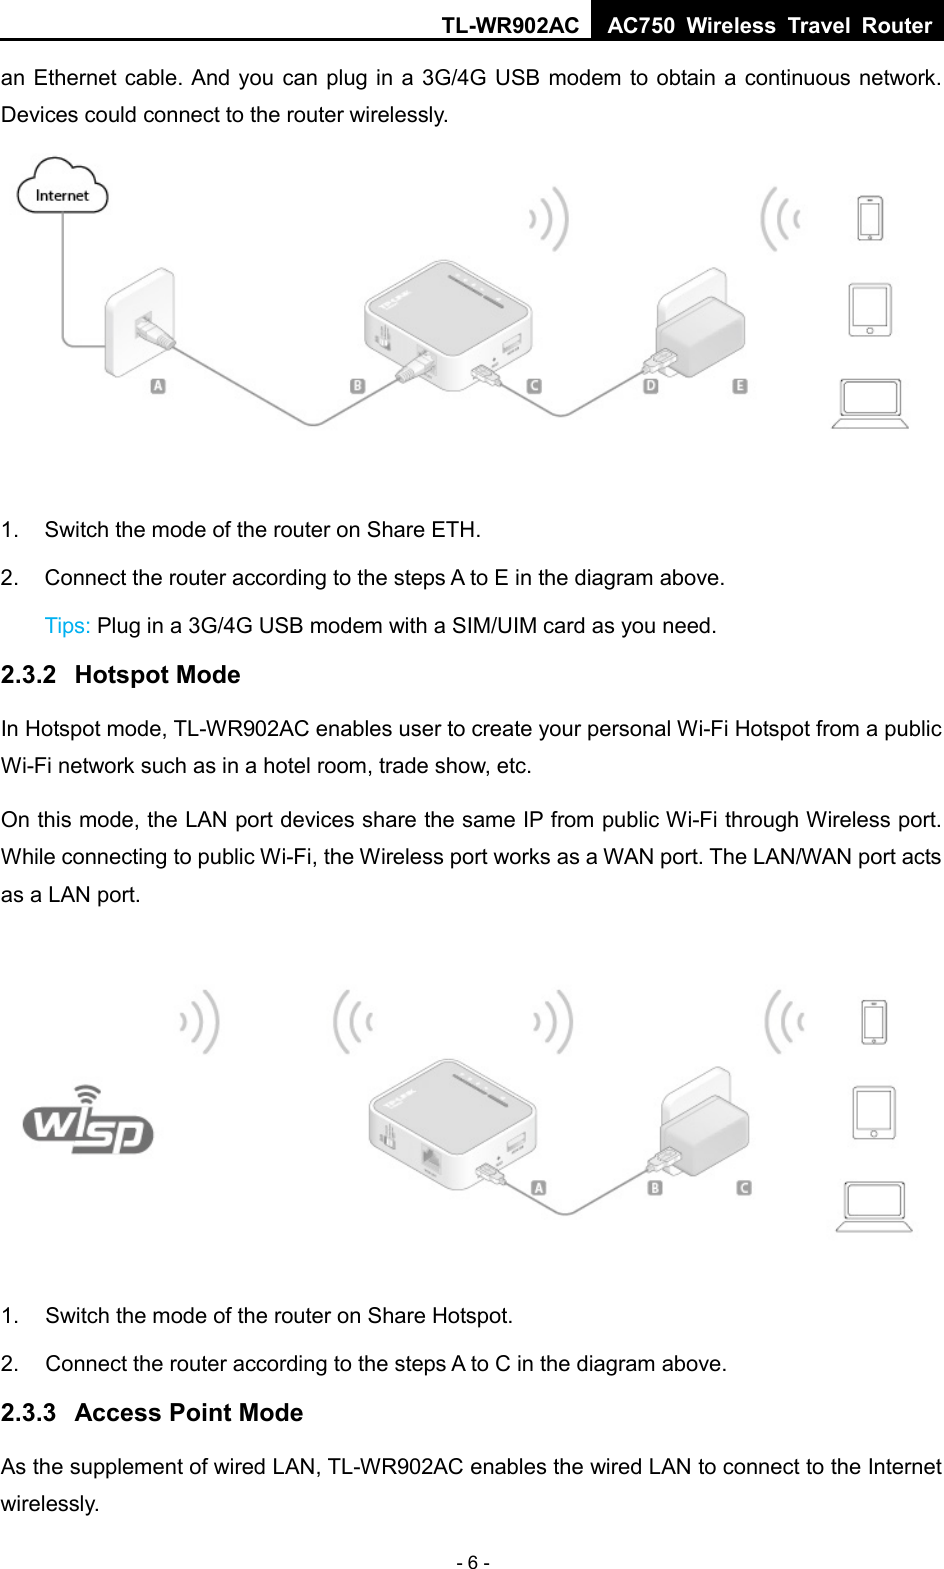 TL-WR902AC AC750  Wireless Travel Router  - 6 - an Ethernet cable. And you can plug in a 3G/4G USB modem to obtain a continuous network. Devices could connect to the router wirelessly.  1. Switch the mode of the router on Share ETH. 2. Connect the router according to the steps A to E in the diagram above. Tips: Plug in a 3G/4G USB modem with a SIM/UIM card as you need. 2.3.2 Hotspot Mode In Hotspot mode, TL-WR902AC enables user to create your personal Wi-Fi Hotspot from a public Wi-Fi network such as in a hotel room, trade show, etc. On this mode, the LAN port devices share the same IP from public Wi-Fi through Wireless port. While connecting to public Wi-Fi, the Wireless port works as a WAN port. The LAN/WAN port acts as a LAN port.  1. Switch the mode of the router on Share Hotspot. 2. Connect the router according to the steps A to C in the diagram above. 2.3.3 Access Point Mode As the supplement of wired LAN, TL-WR902AC enables the wired LAN to connect to the Internet wirelessly. 